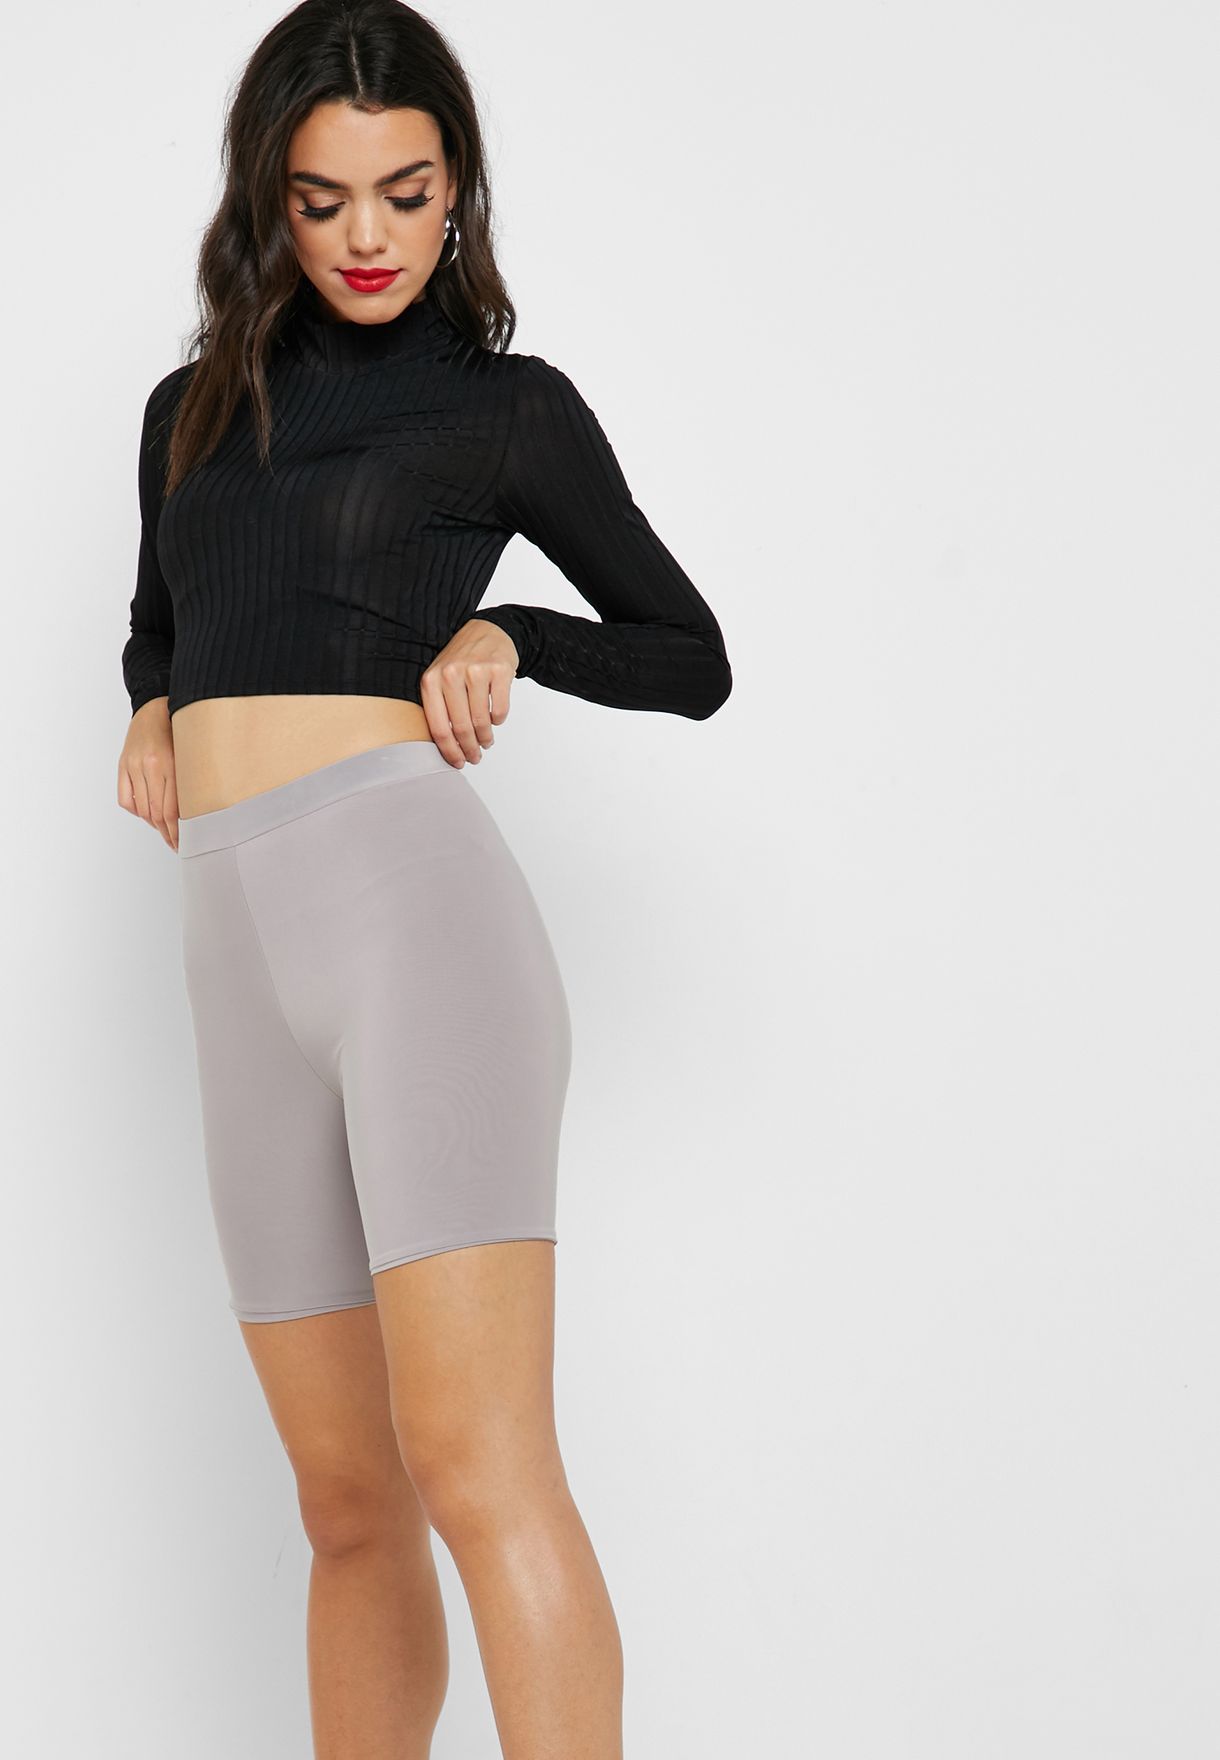 Sharpen song sulfur Buy Missguided grey Slinky Cycling Shorts for Women in MENA, Worldwide